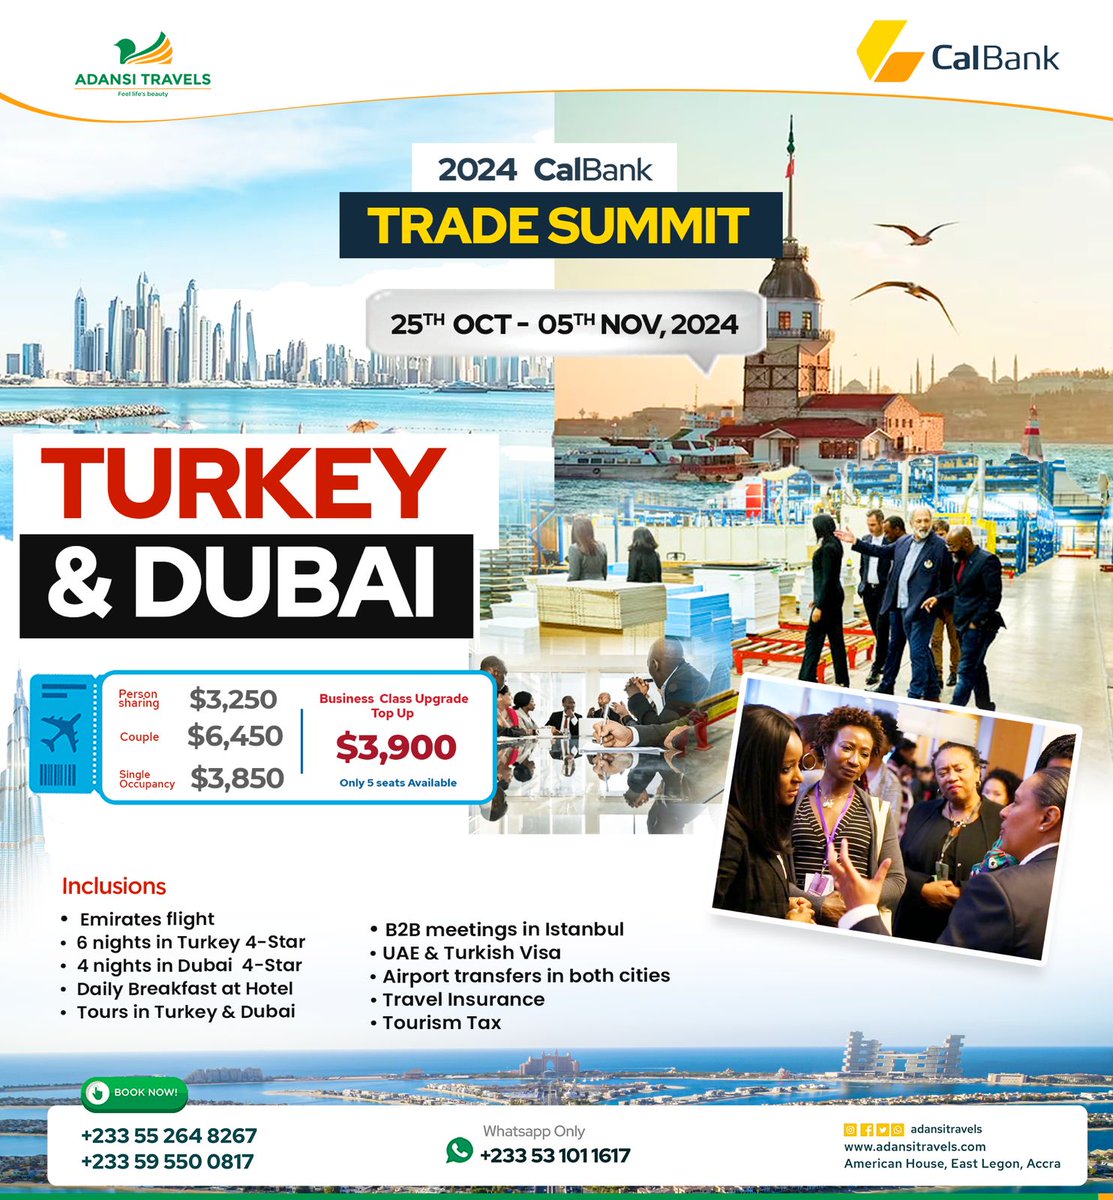 Join the exciting 2️⃣0️⃣2️⃣4️⃣ CalBank Trade Summit from 25th Oct - 5th Nov 2024 in Turkey and Dubai. This top event offers amazing networking and business chances in these vibrant cities.

Get to attend B2B meetings to build valuable connections and explore growth opportunities.